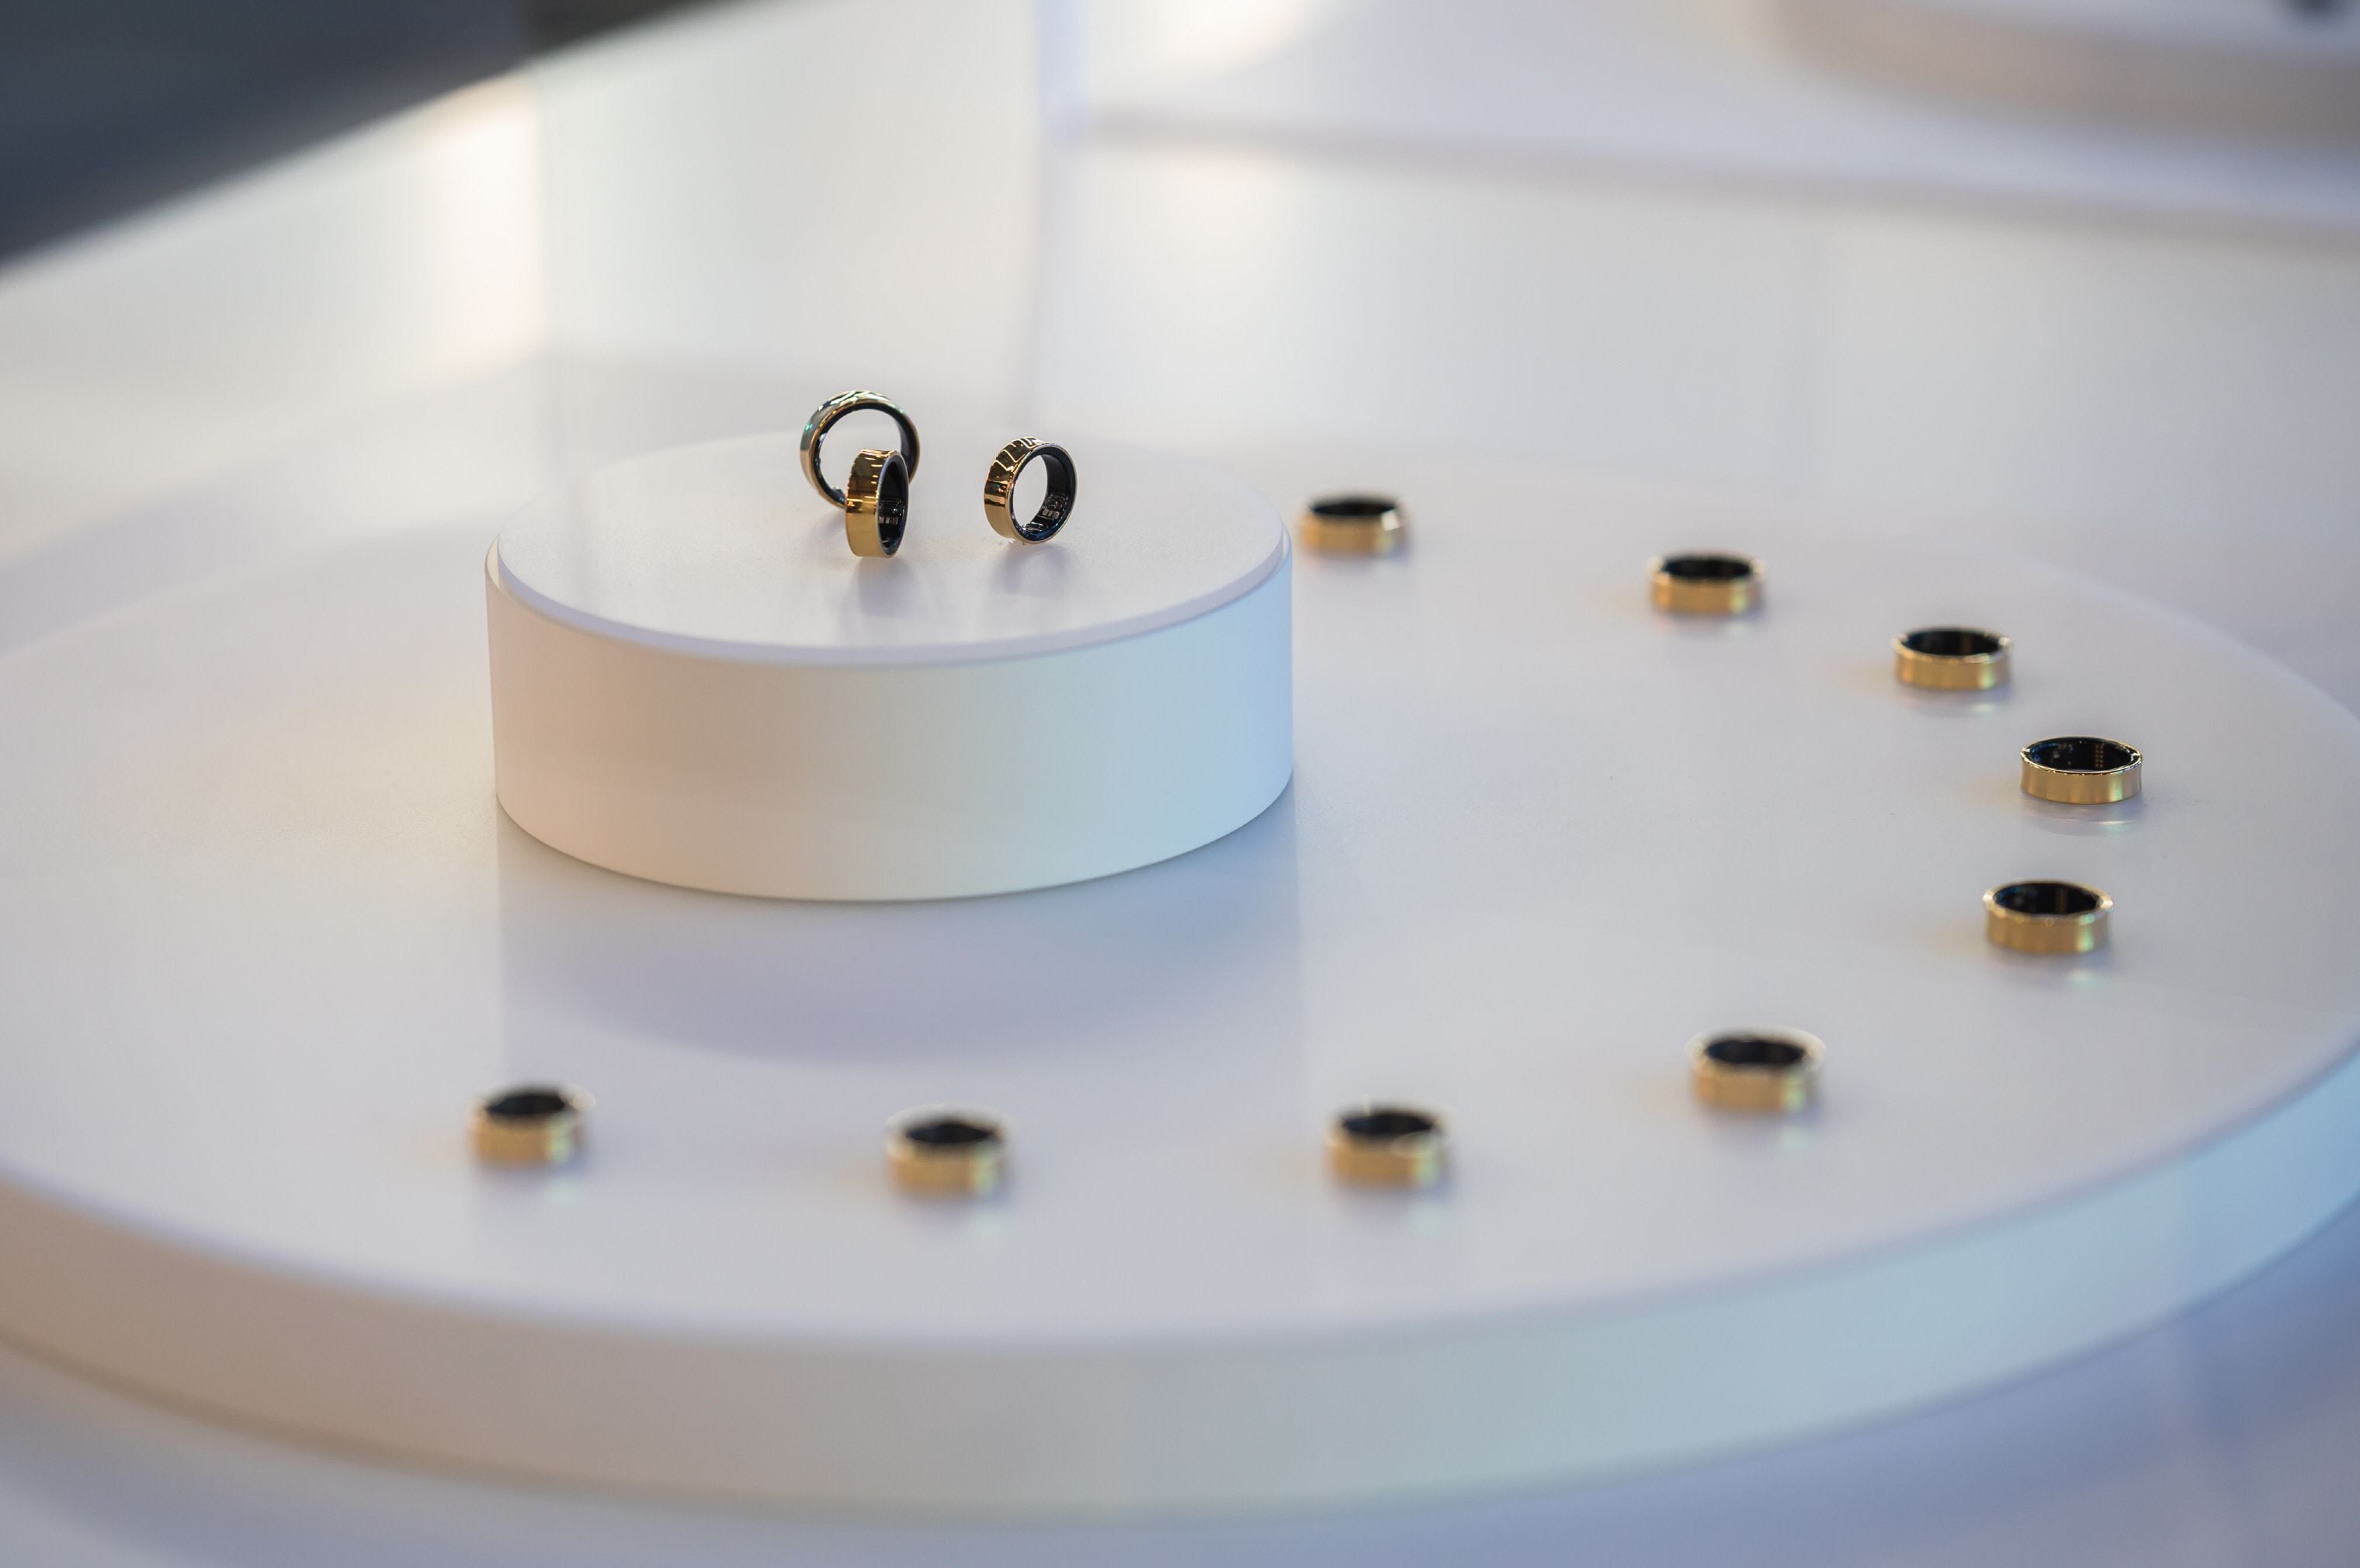 samsung unveils galaxy ring, being one step ahead of apple